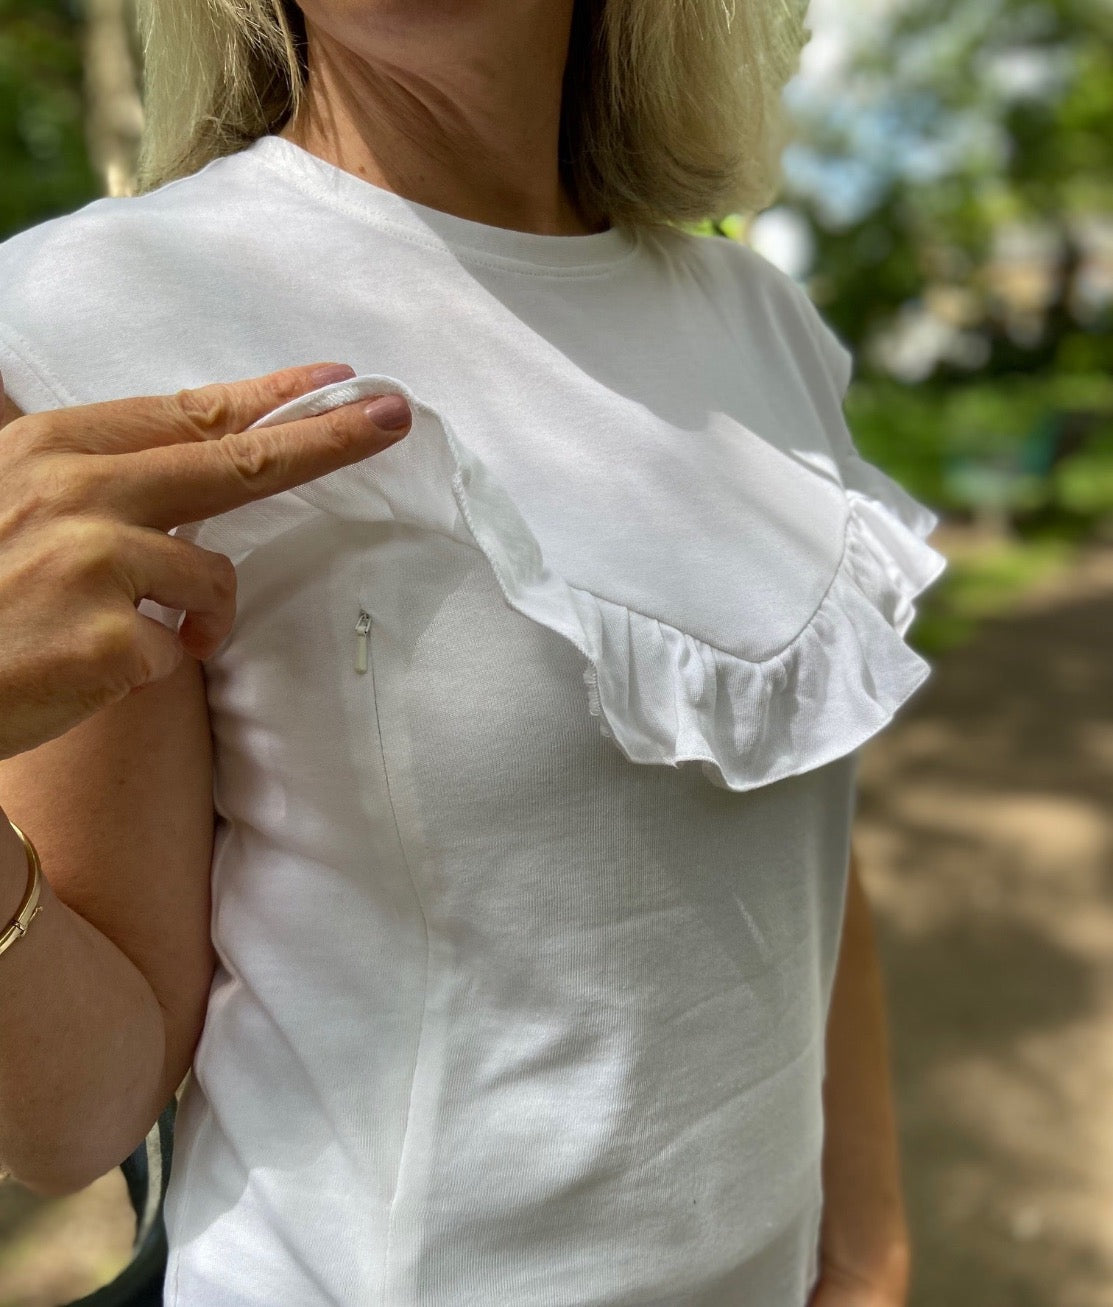 Breastfeeding top. Effortless everyday style and comfort with this white breastfeeding t-shirt. Designed for stress-free nursing on-the-go. Hidden zips sit under the ruffle, easily done one-handed makes it the perfect everyday top for new mums, and a must-have for your breastfeeding wardrobe. 